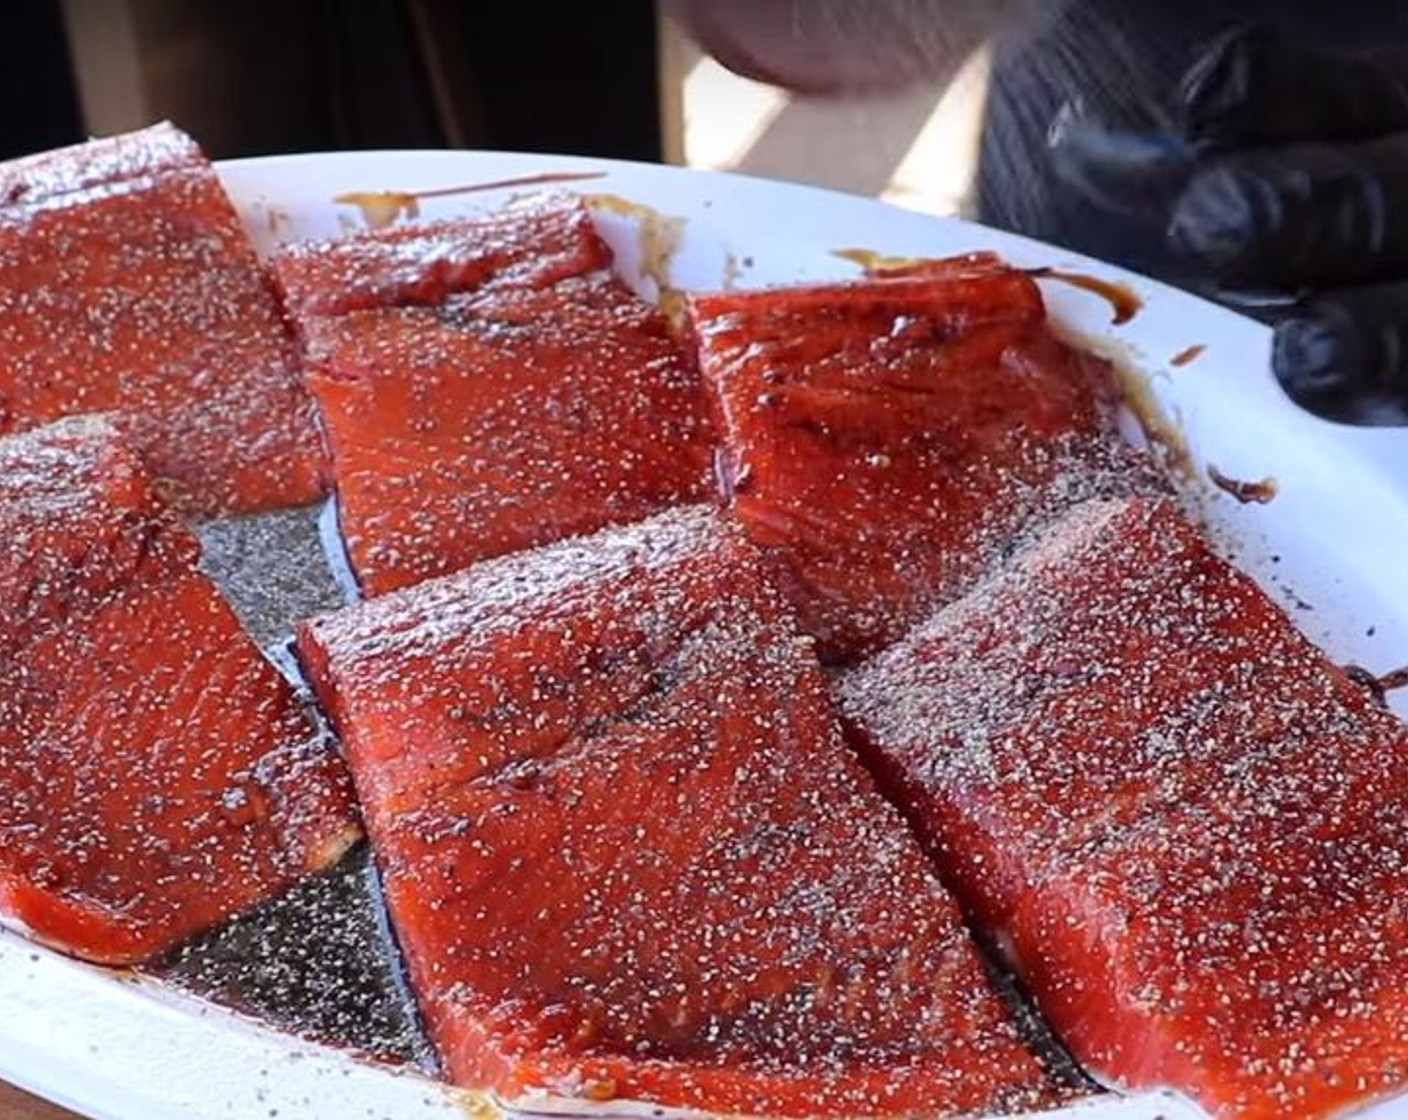 step 6 Season the salmon filets with pastrami seasoning and place directly on the cooking grate skin side down.